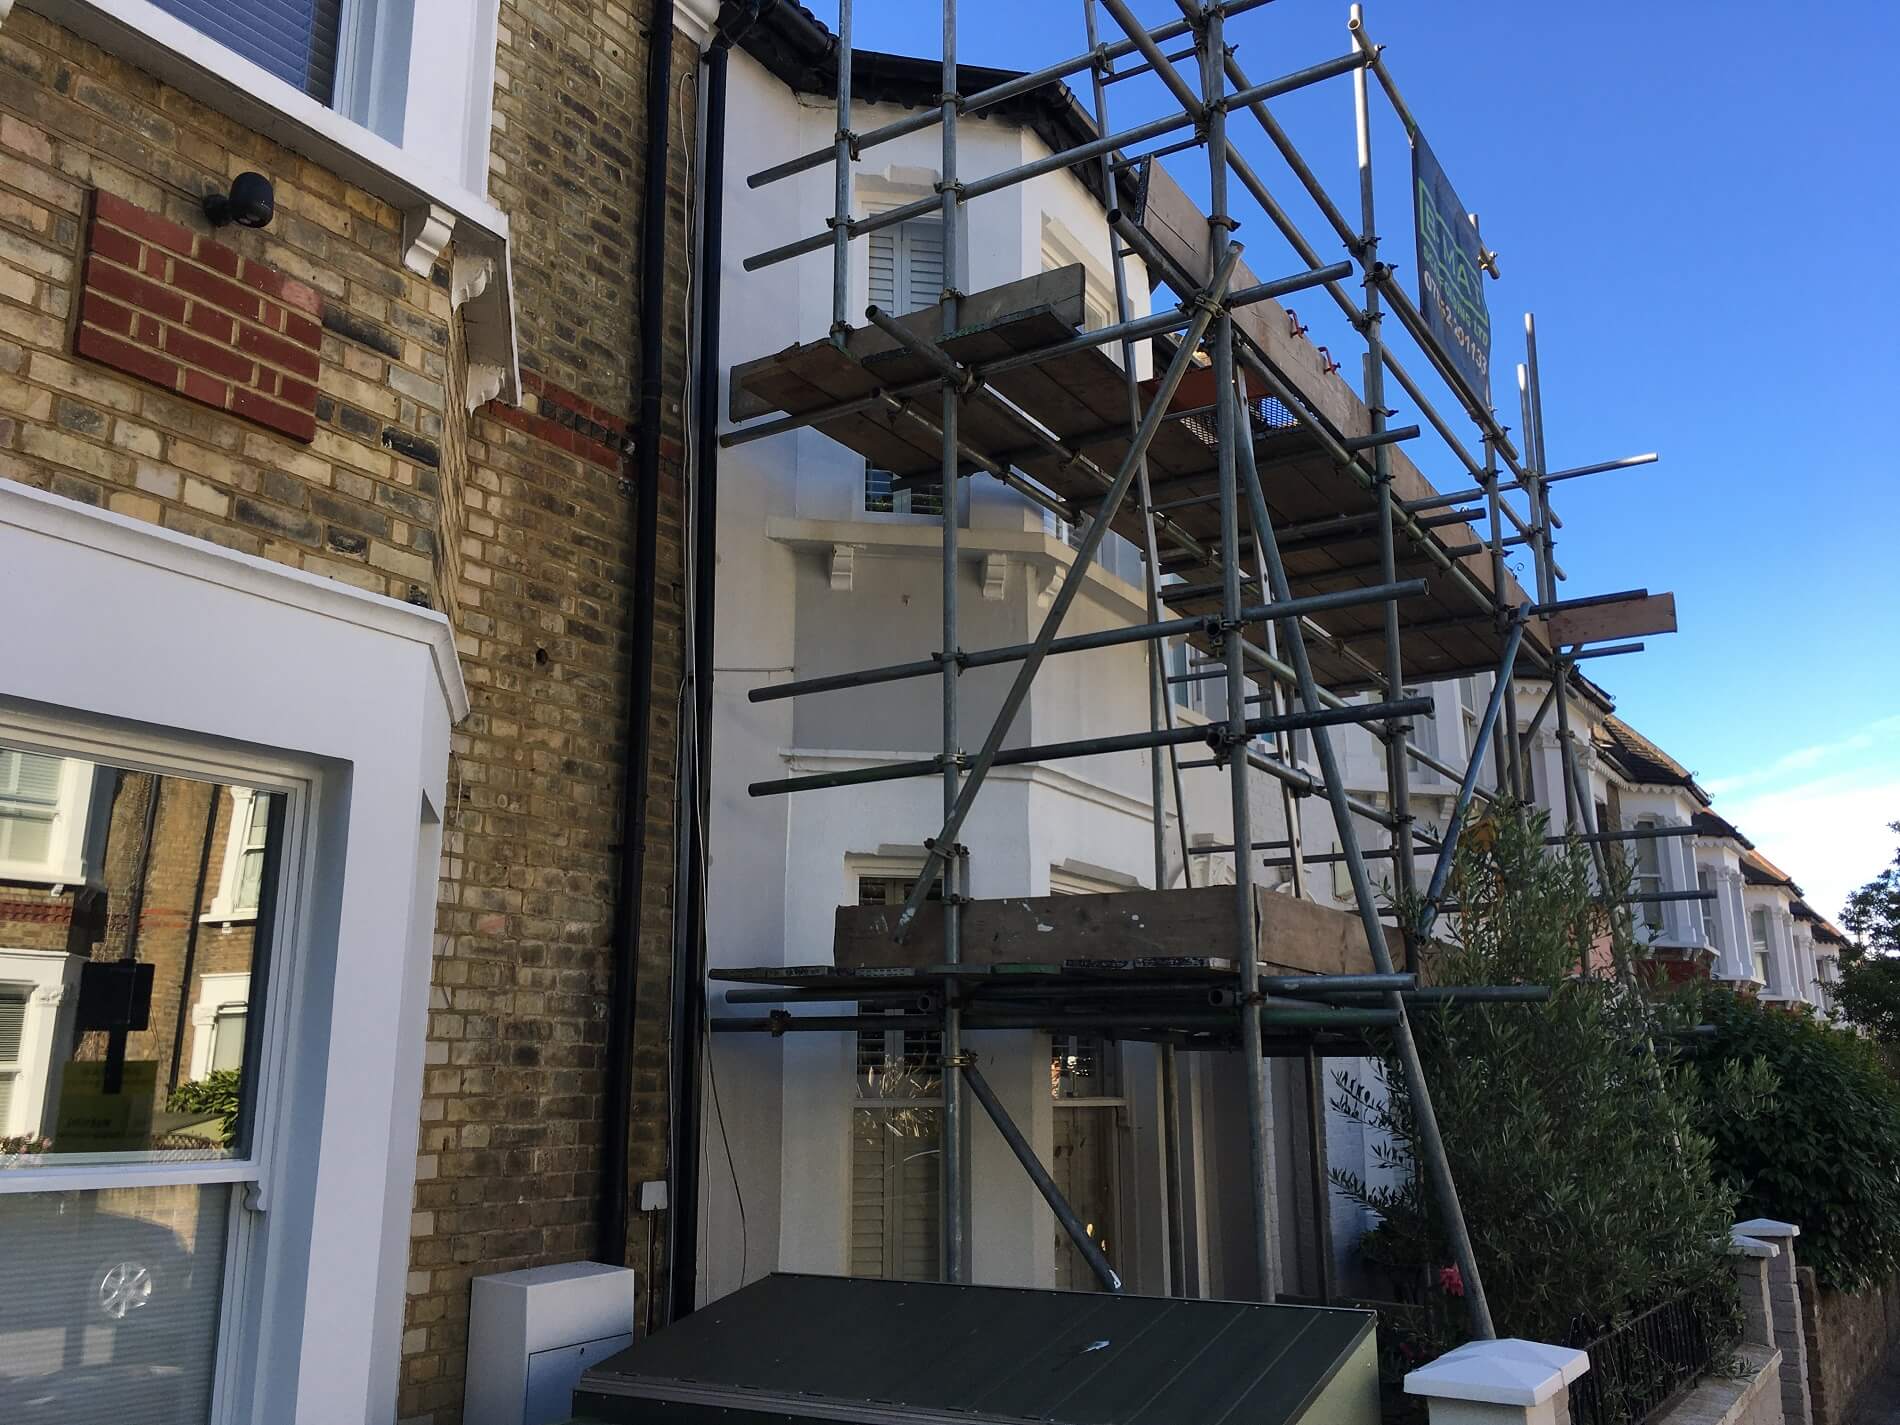 Erected scaffold on front of a house